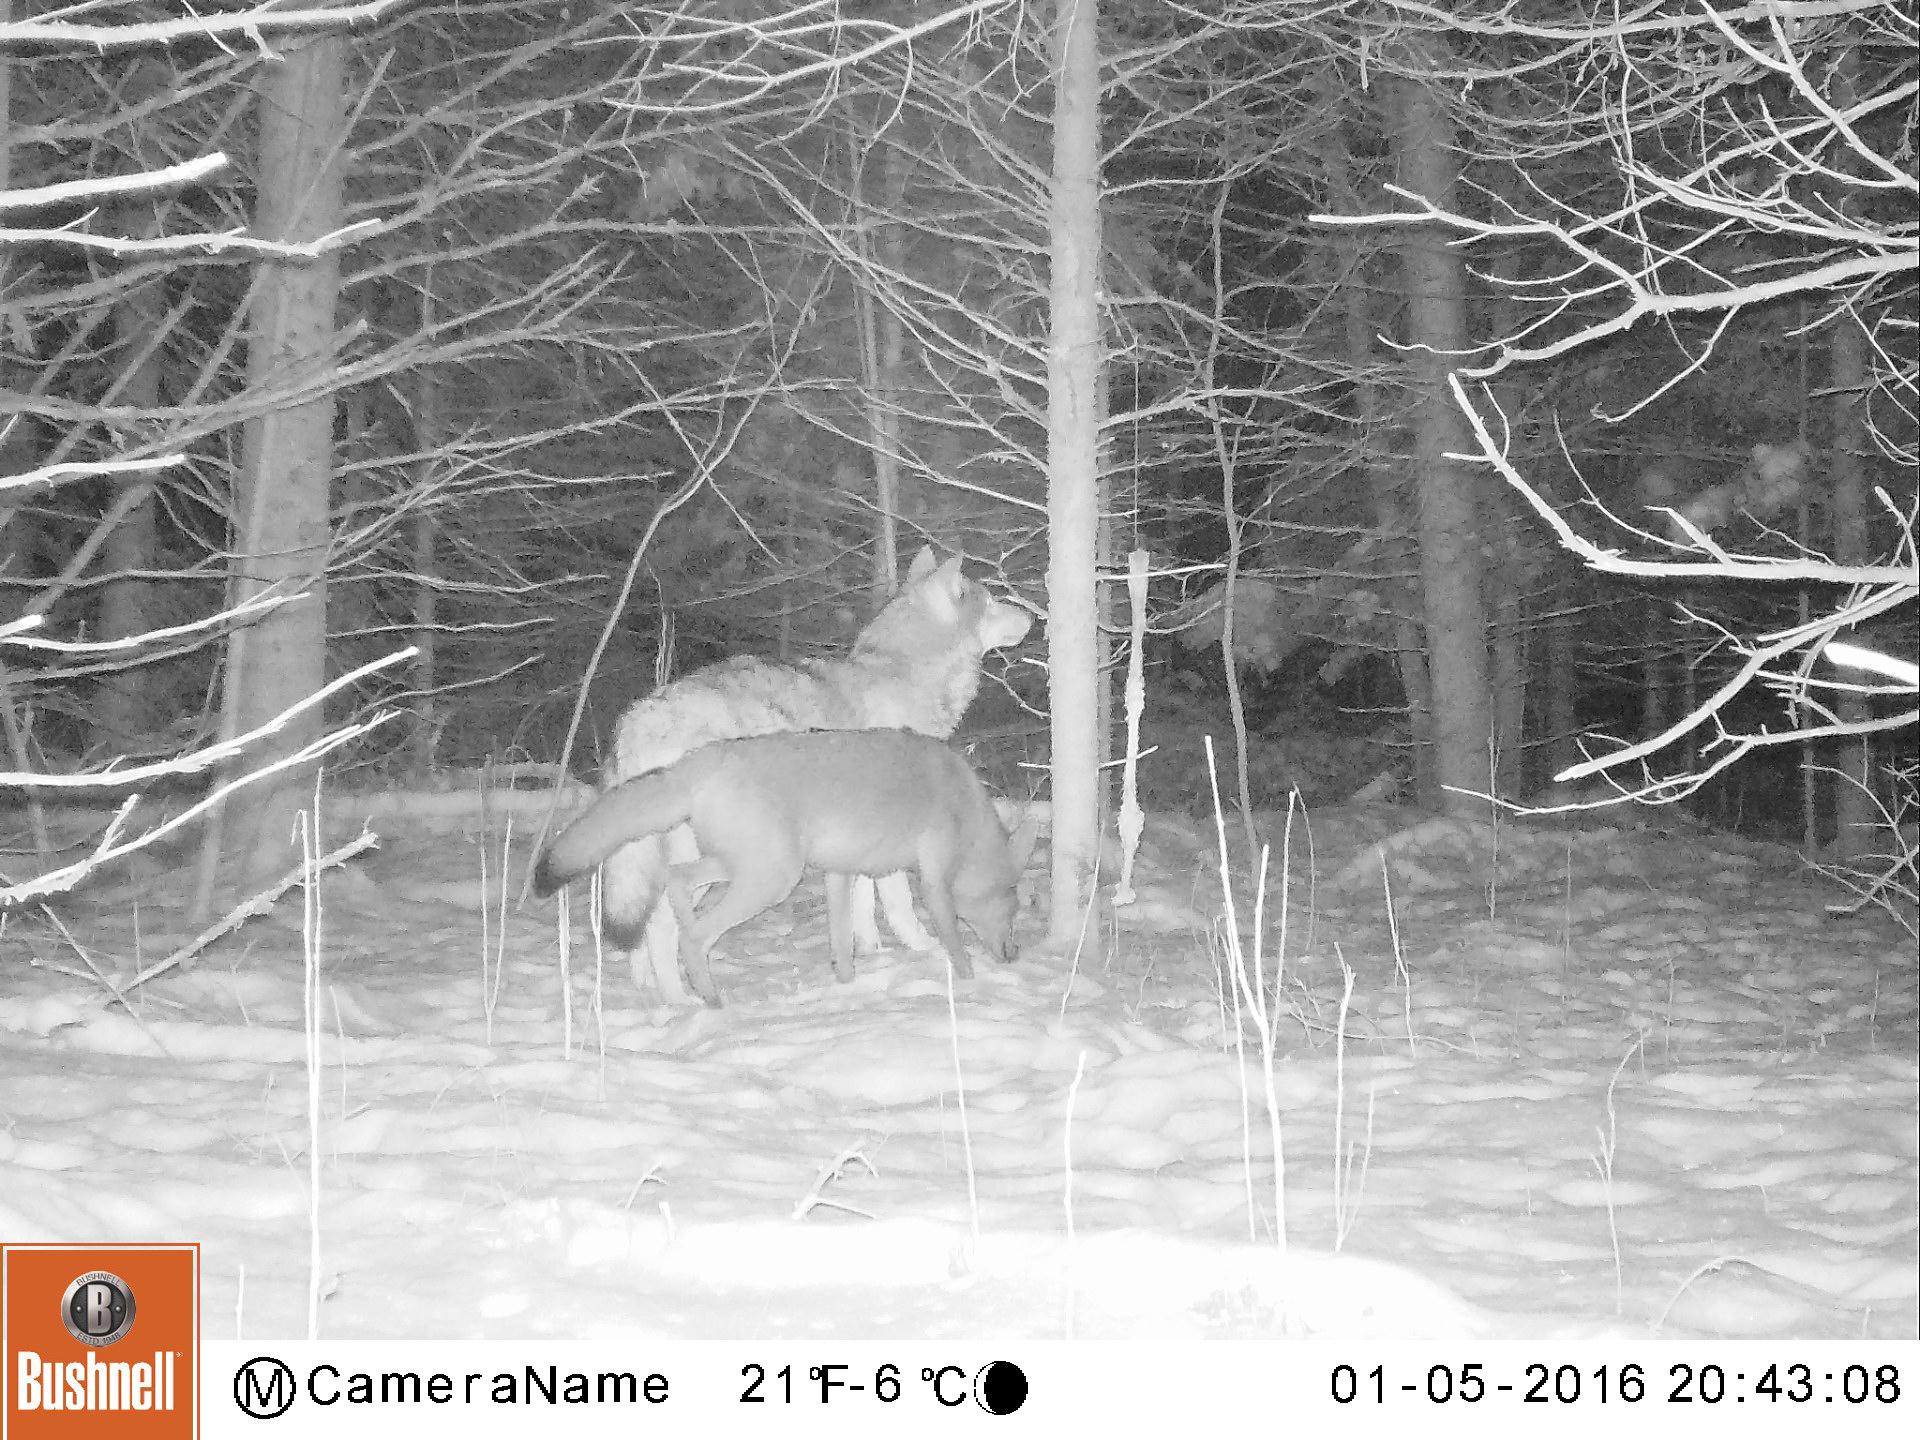 Side view of wolf and coyote in snowy woods at night on trail camera